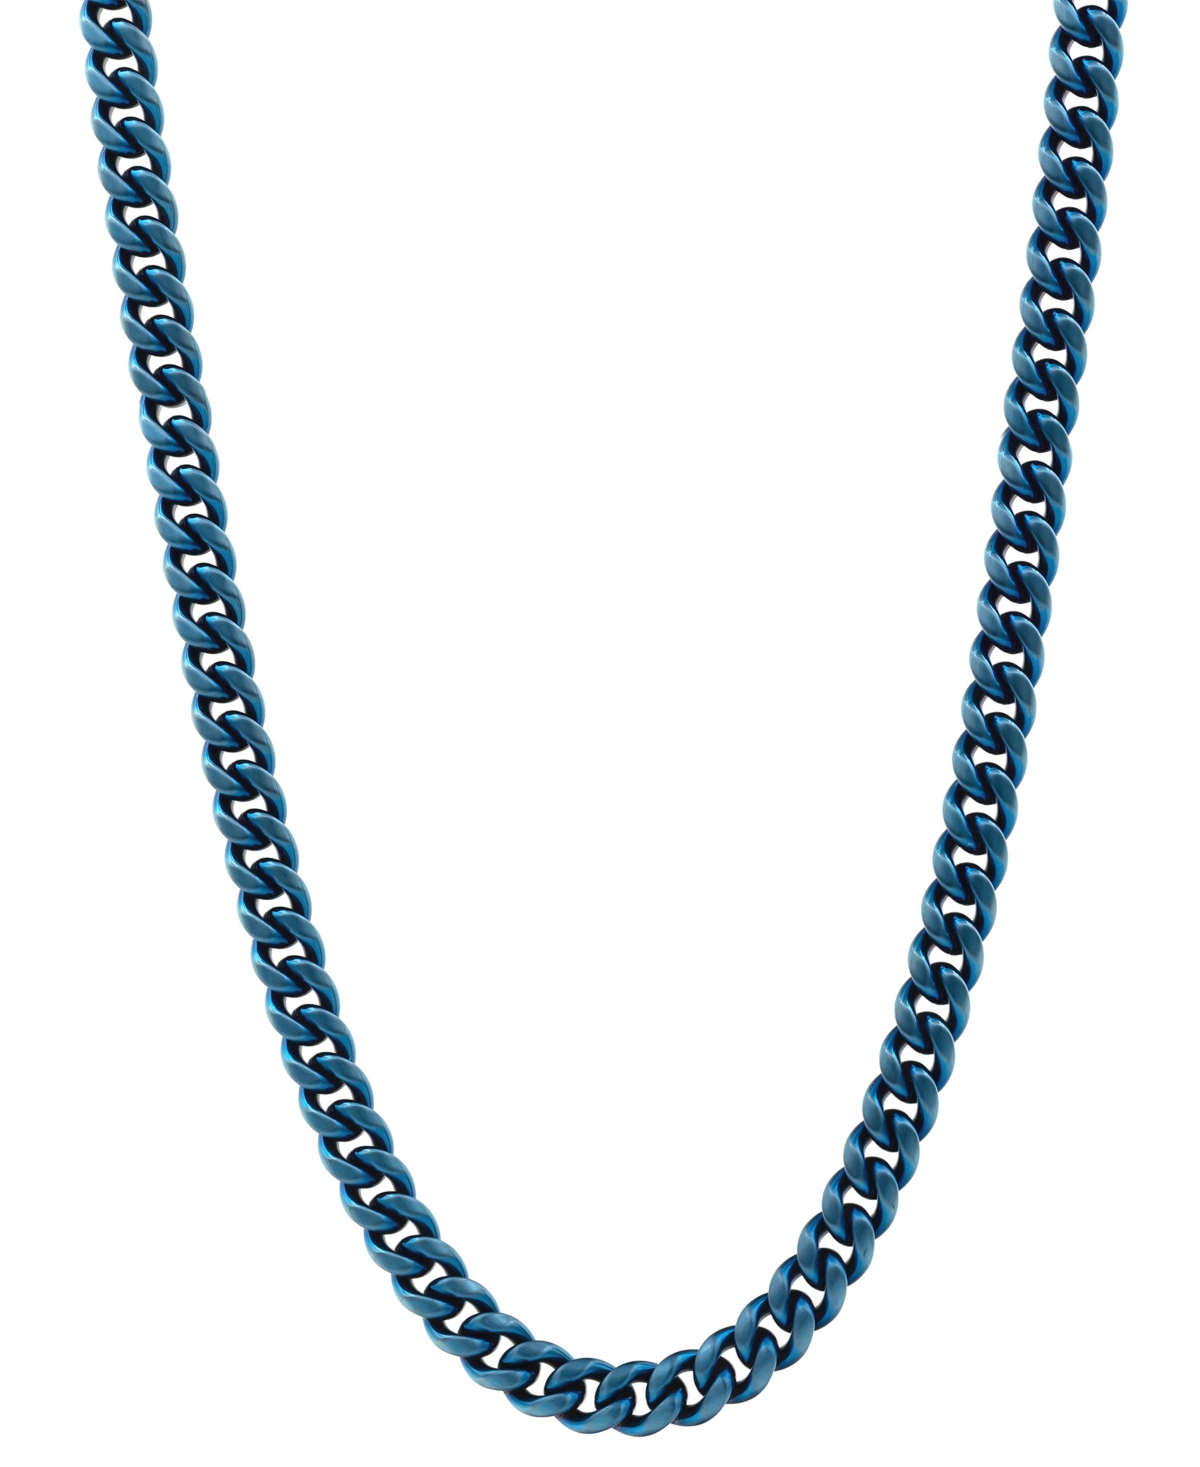 Men's Miami Cuban Link 24" Chain Necklace in Blue Ion-Plated Stainless Steel - Blue